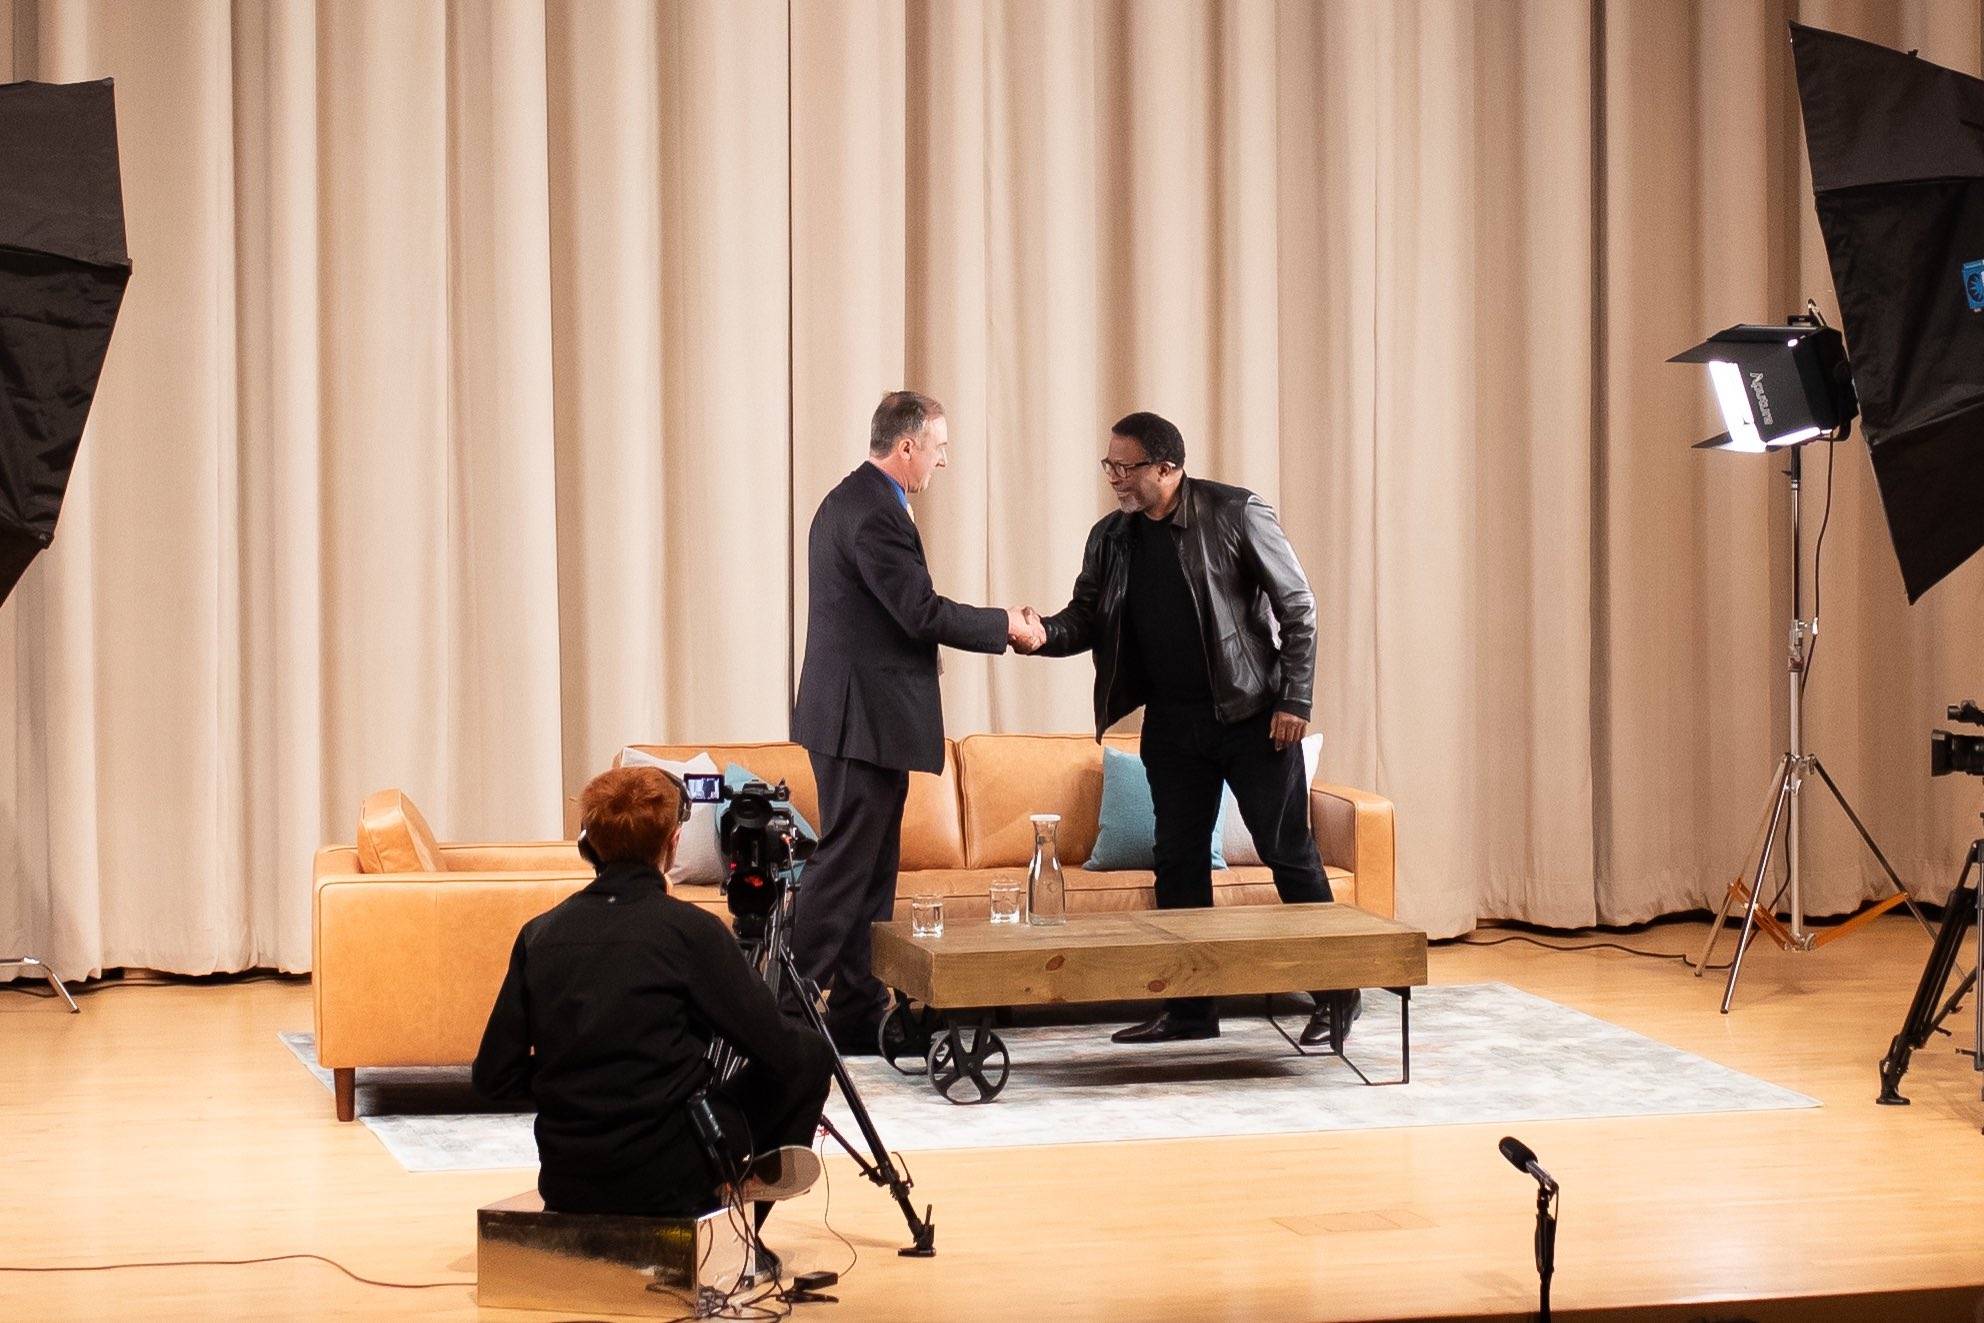 Dean John Fleming, left, shakes Thomas Carter's hand on stage during the alumni Q&A.